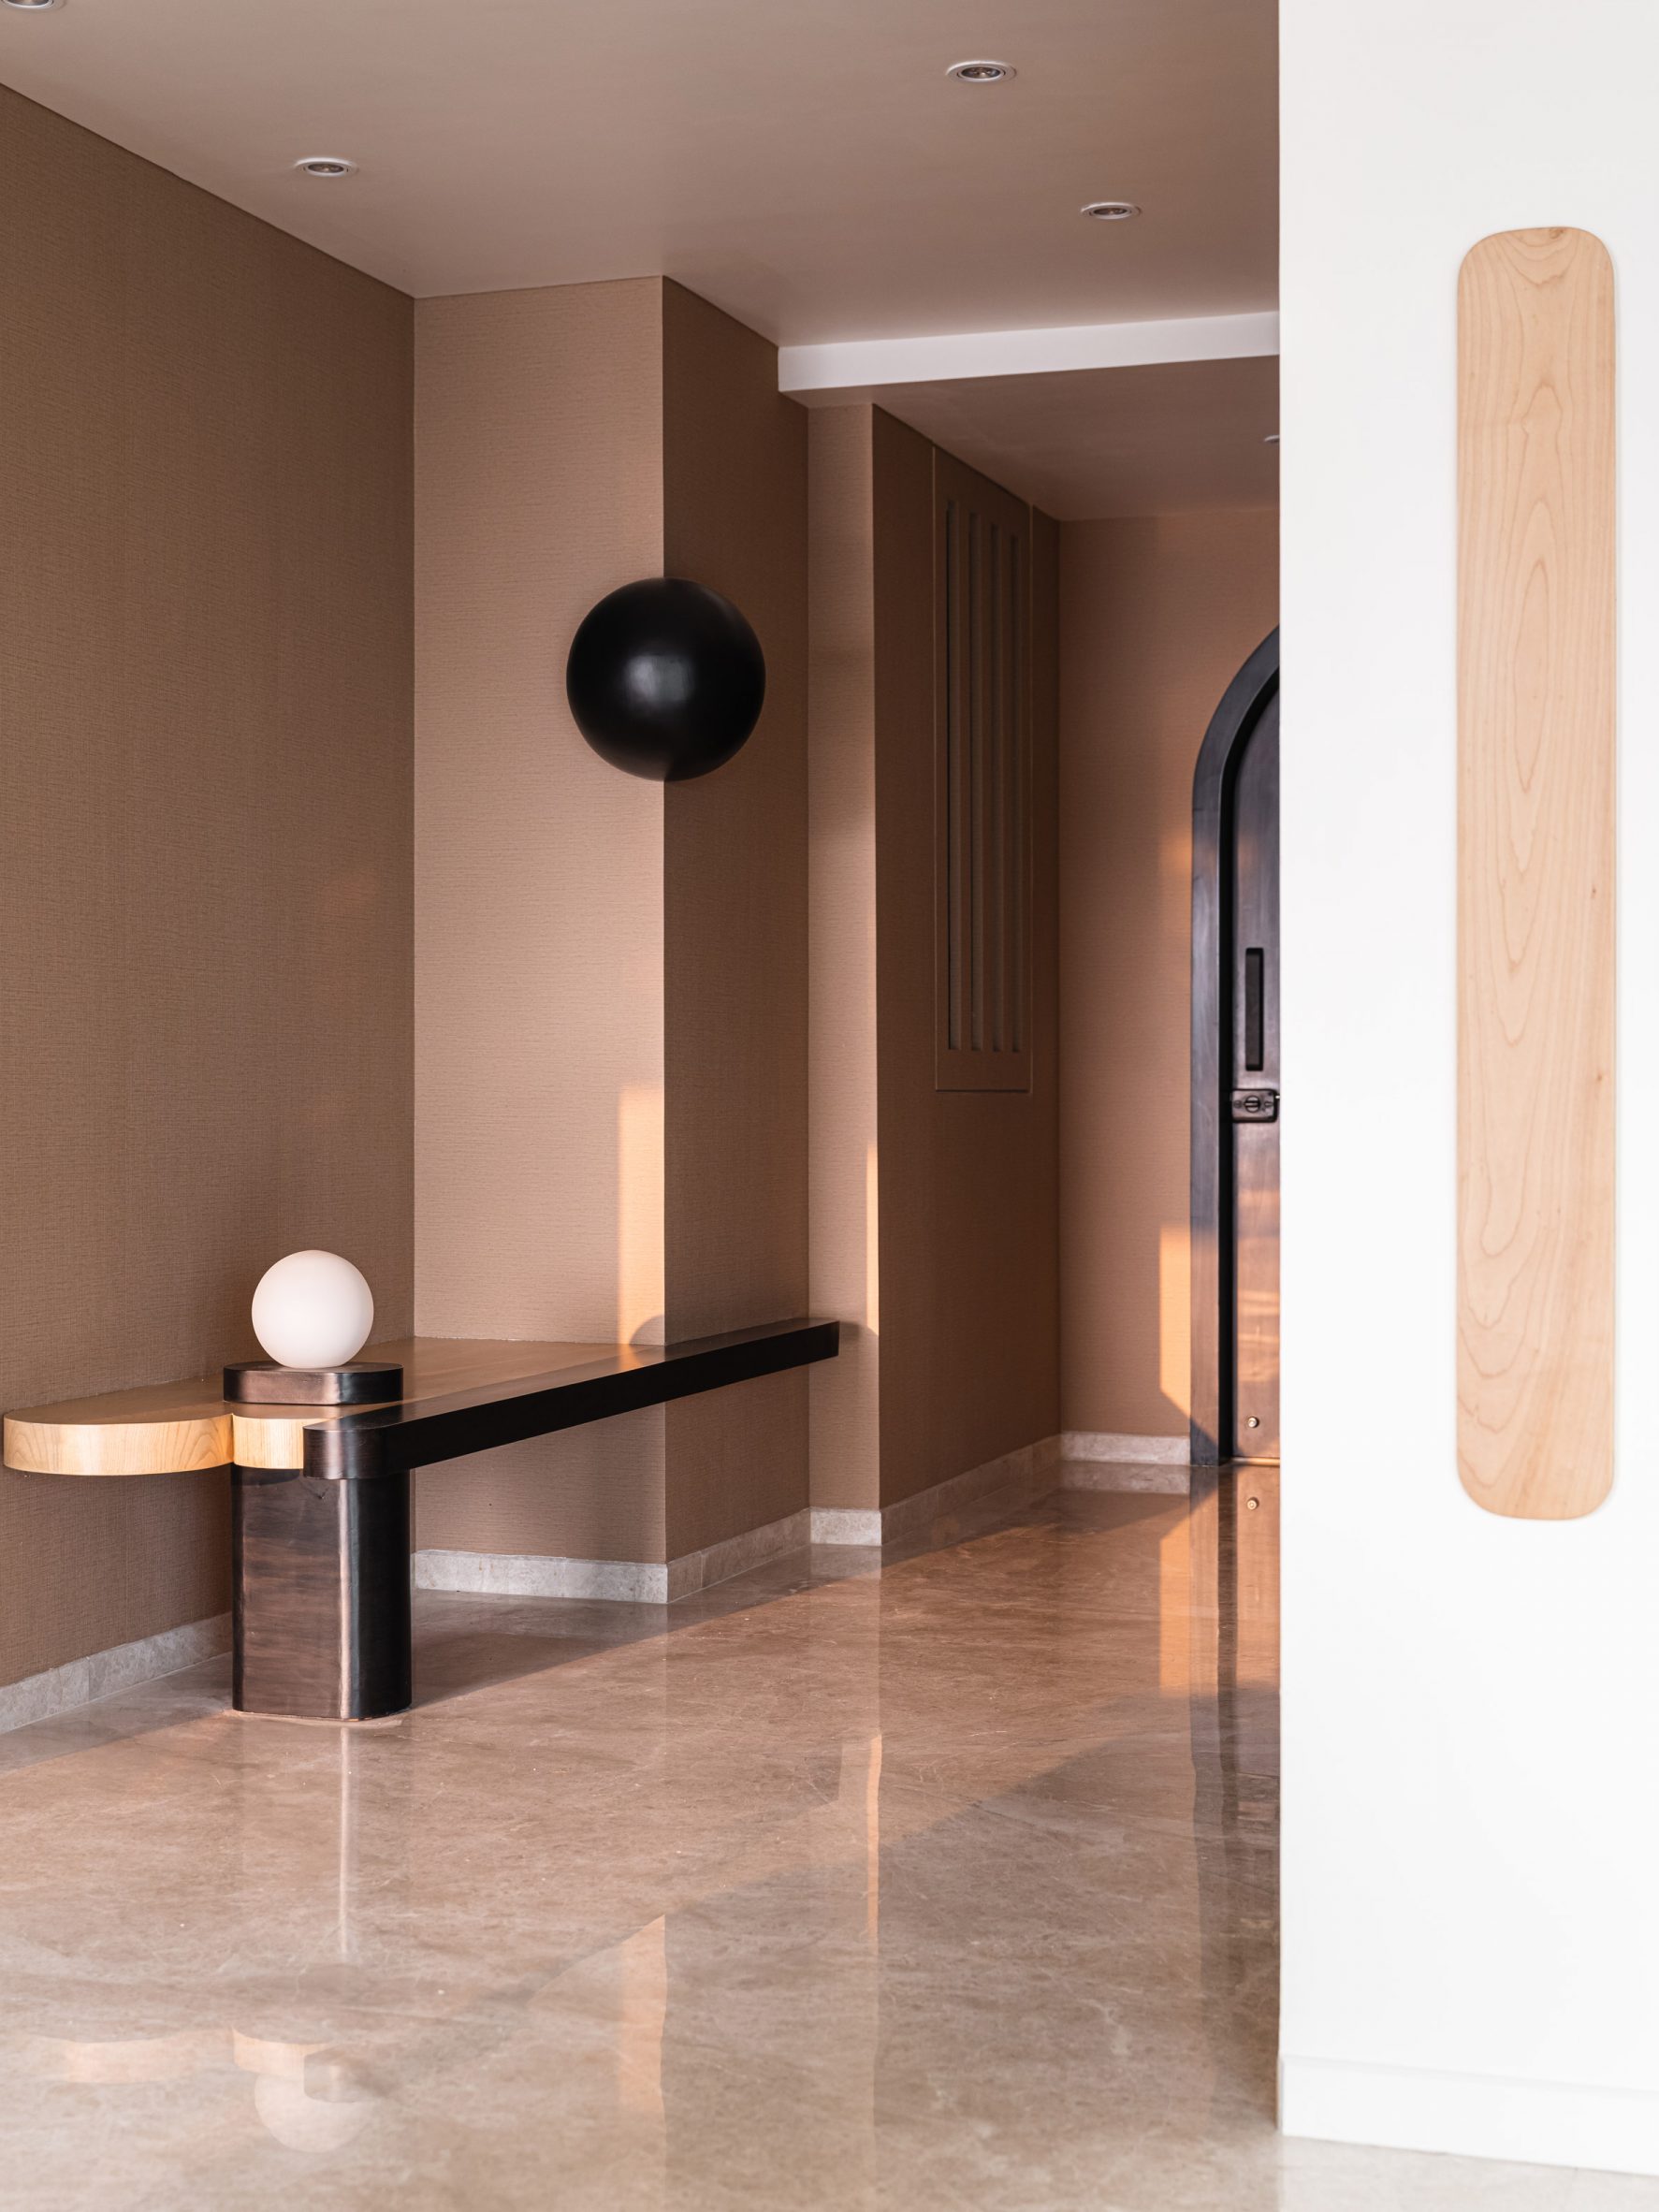 Entrance hall with brown painted walls and wooden console with white sphere in Mumbai apartment